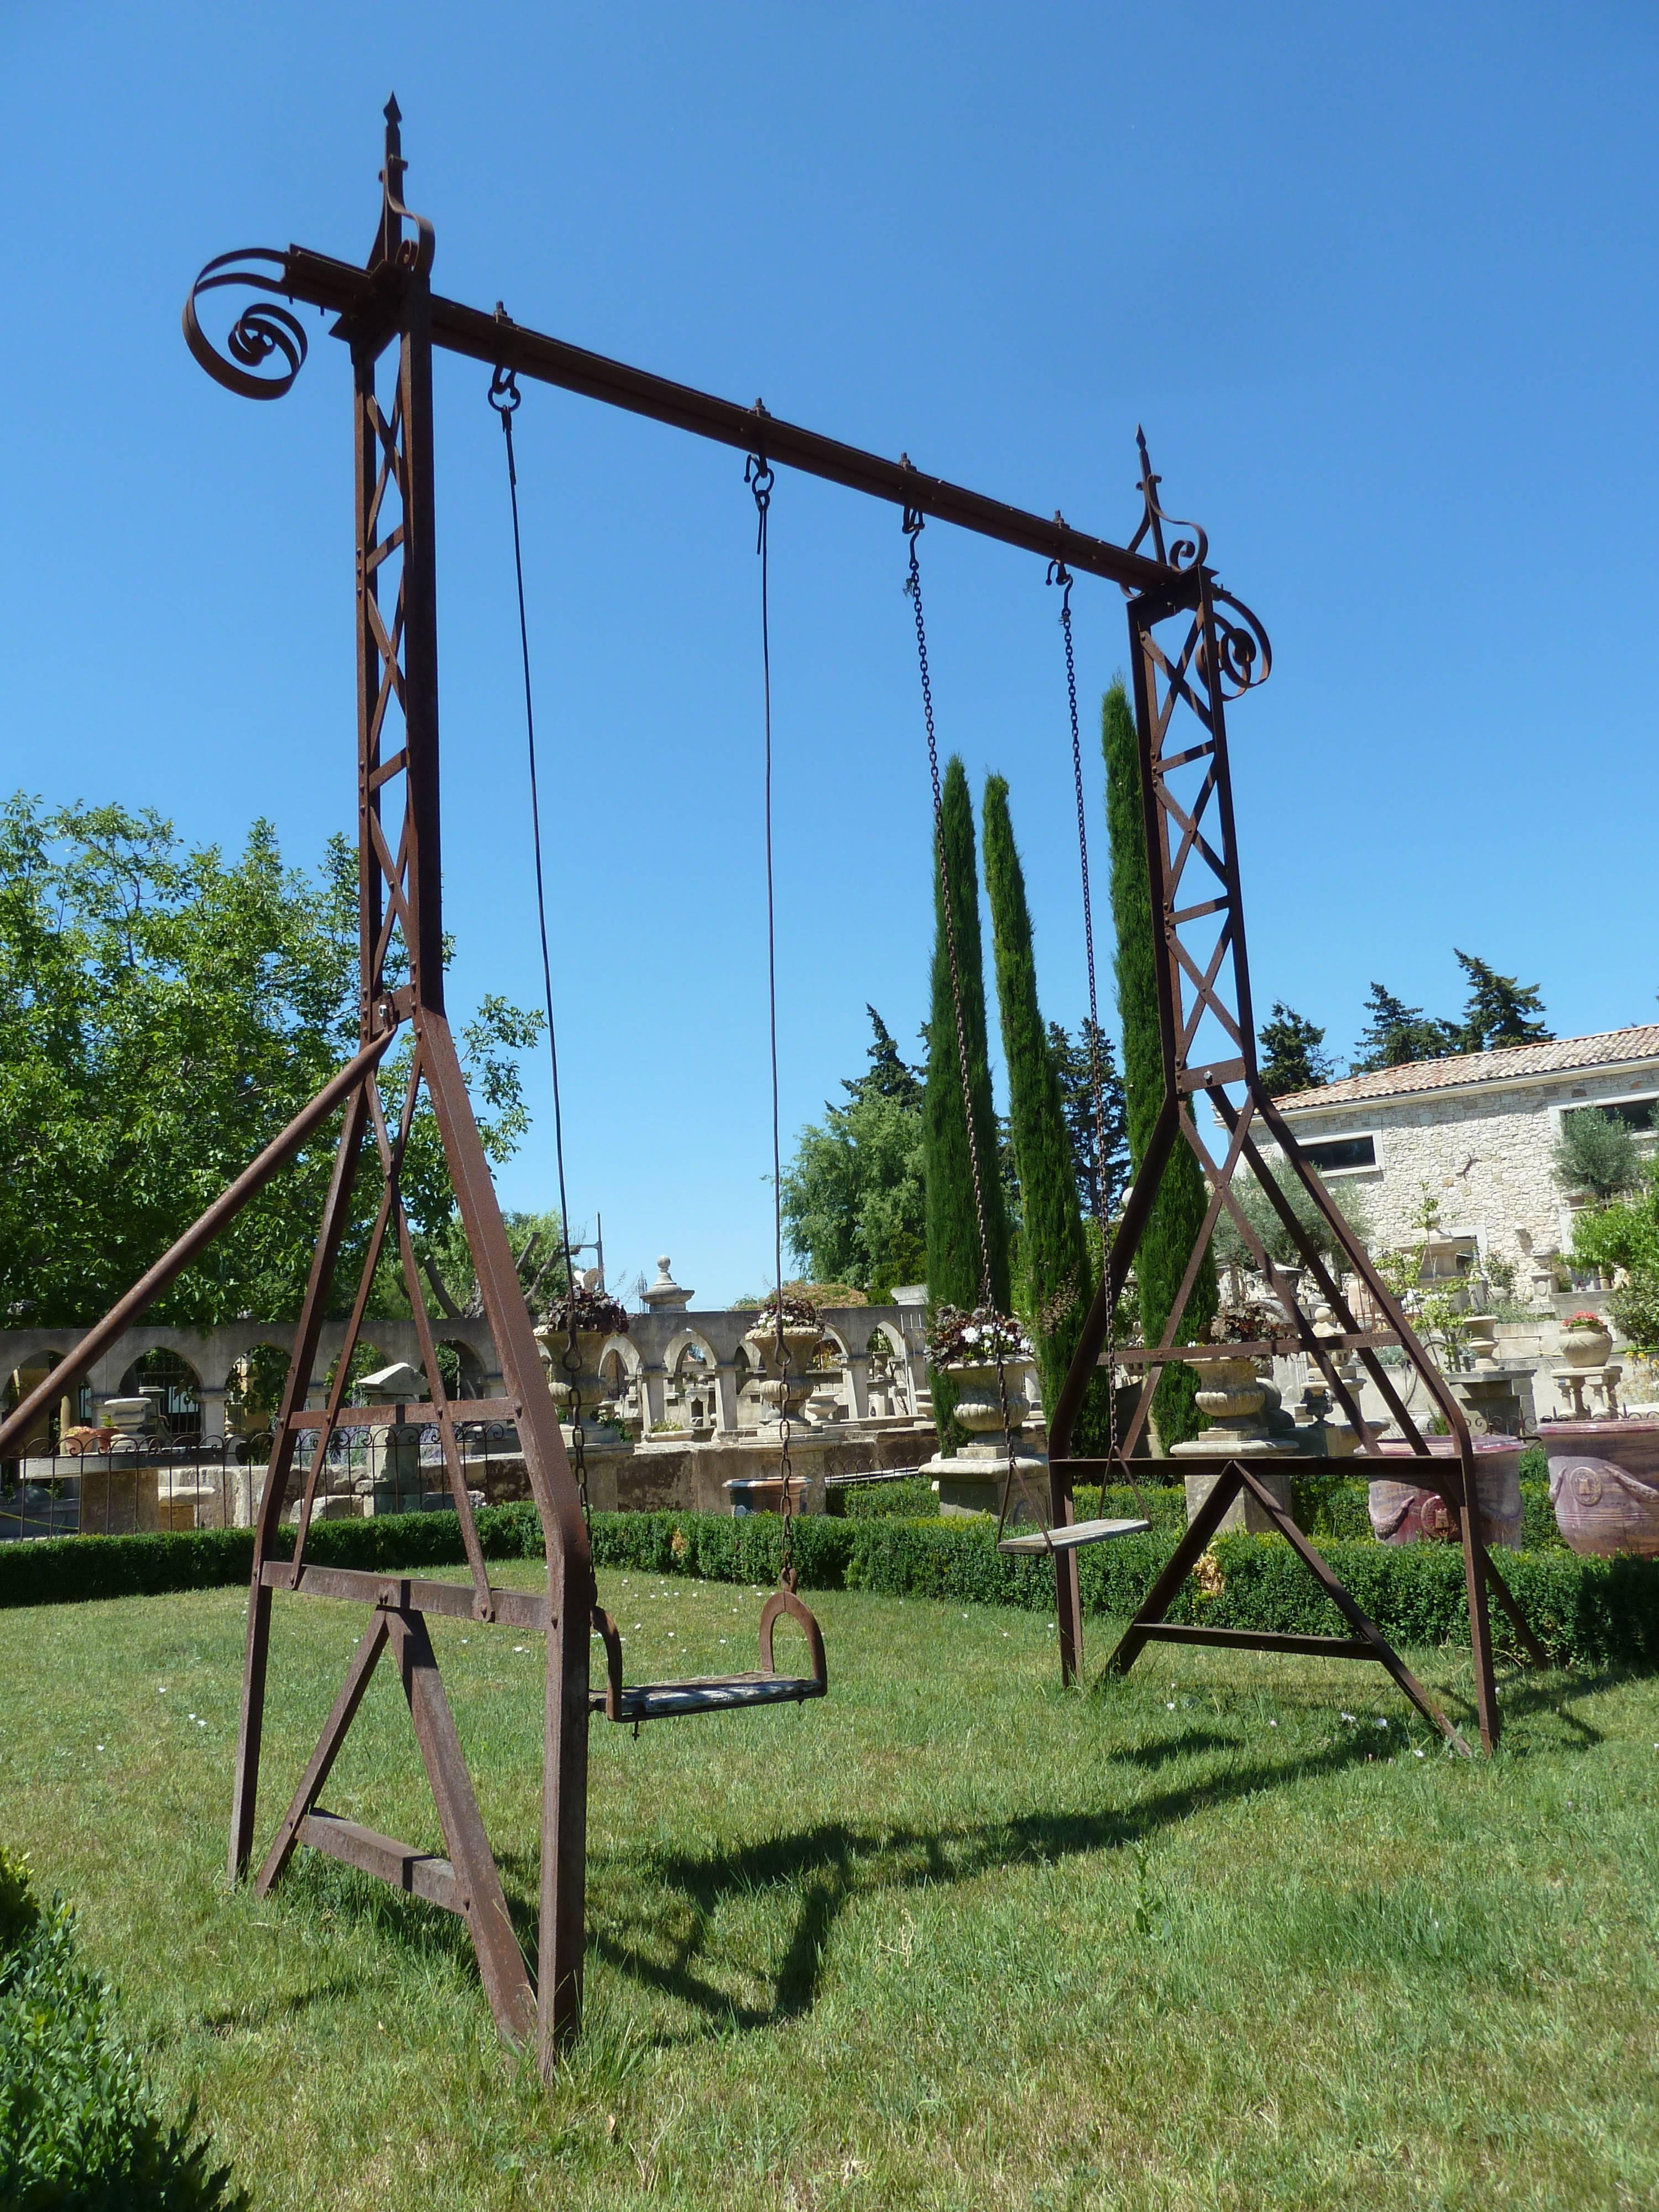 This wonderful French wrought iron swing dates from the beginning of the 20th century and has been made by a master craftsman from Gustave Eiffel's school.

Both wooden seats measures 50cm and 40cm long.

This is an essential decorative item for